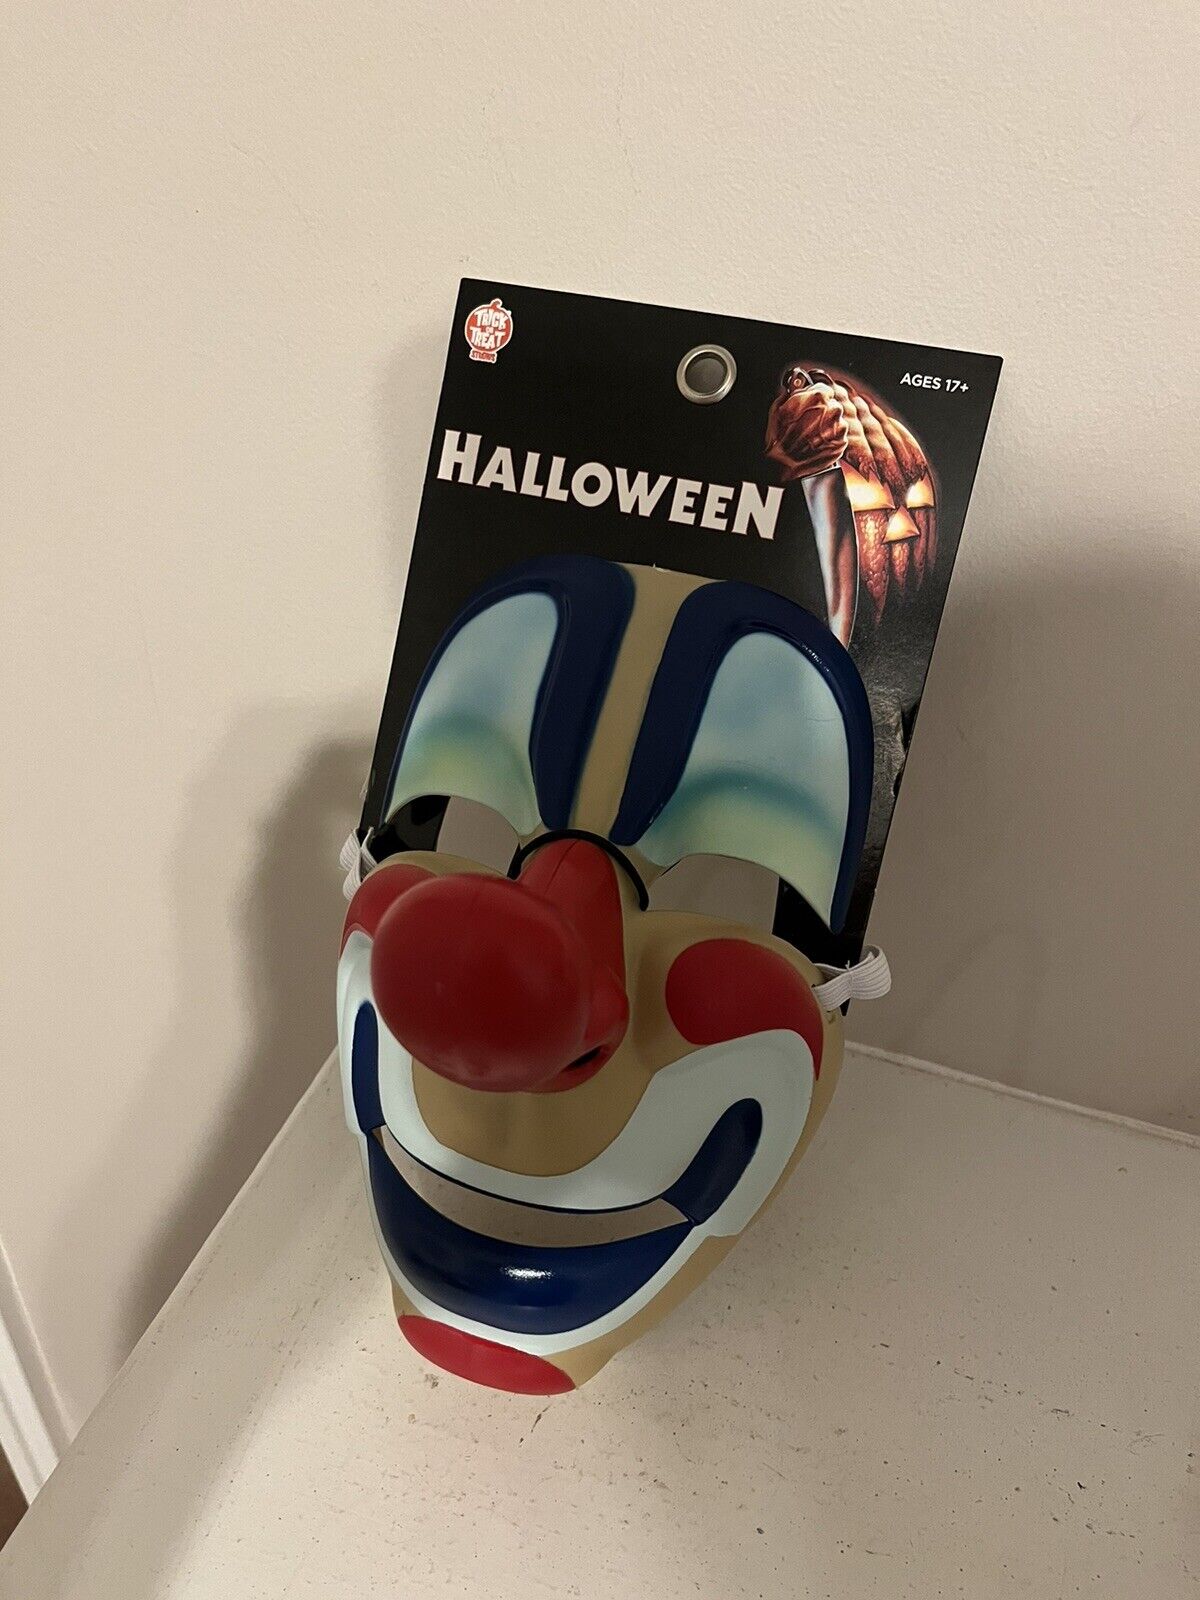 Halloween Movie - 1978 YOUNG MICHAEL MYERS CLOWN MASK by Trick or Treat Studios